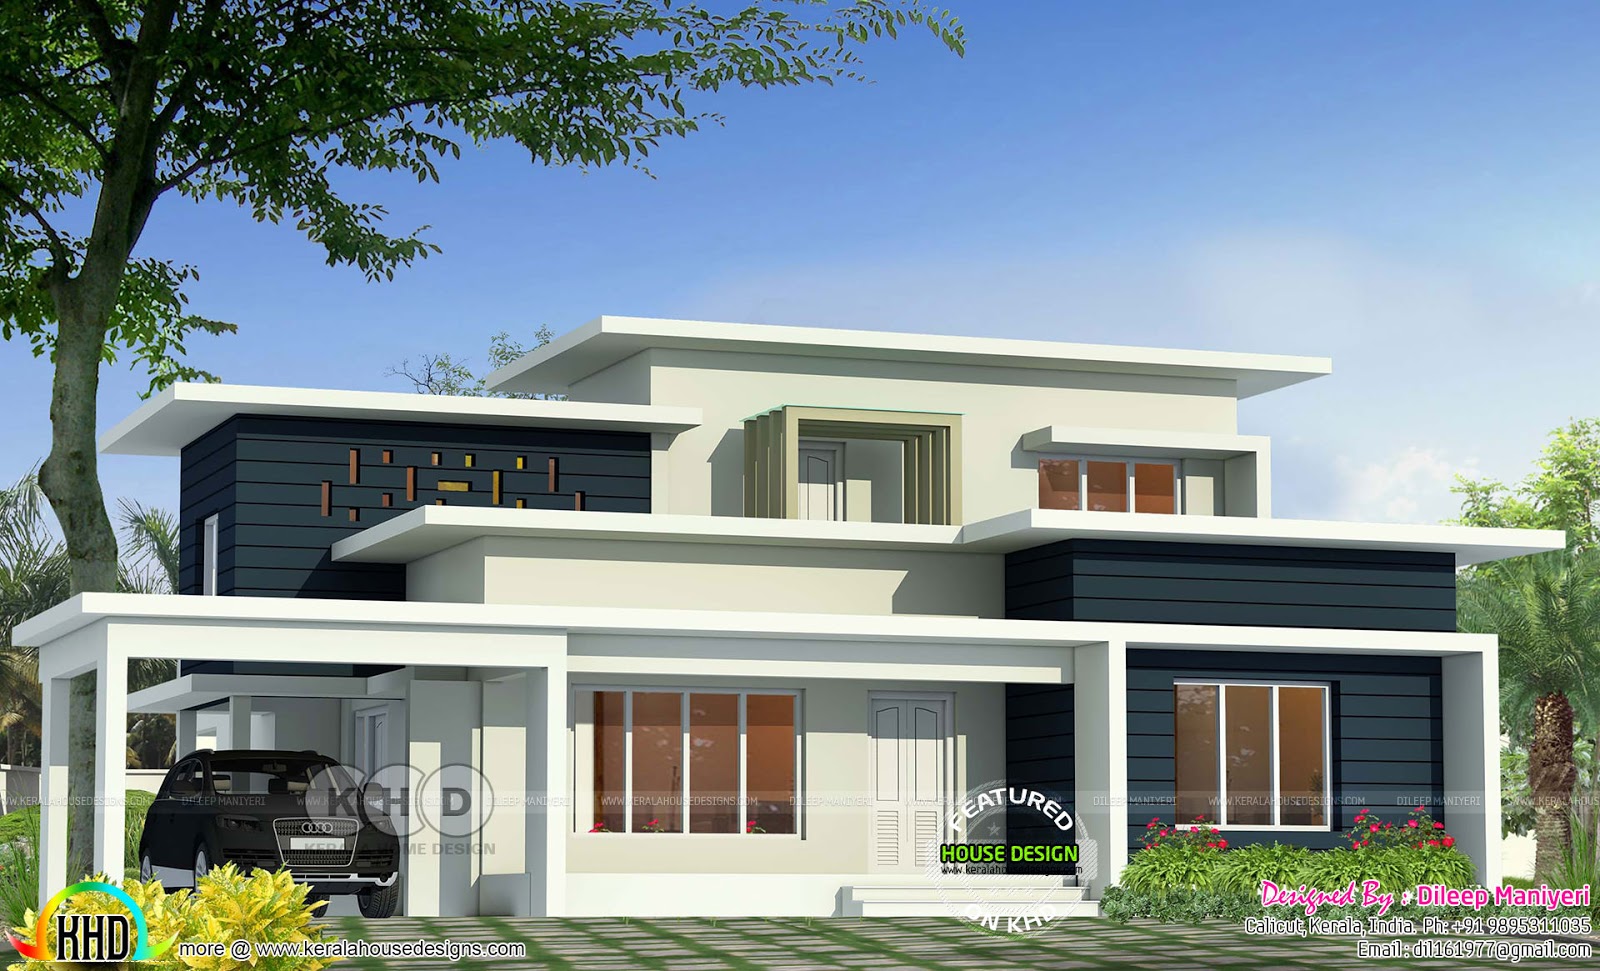 2061 sq-ft super flat roof contemporary home - Kerala home design and